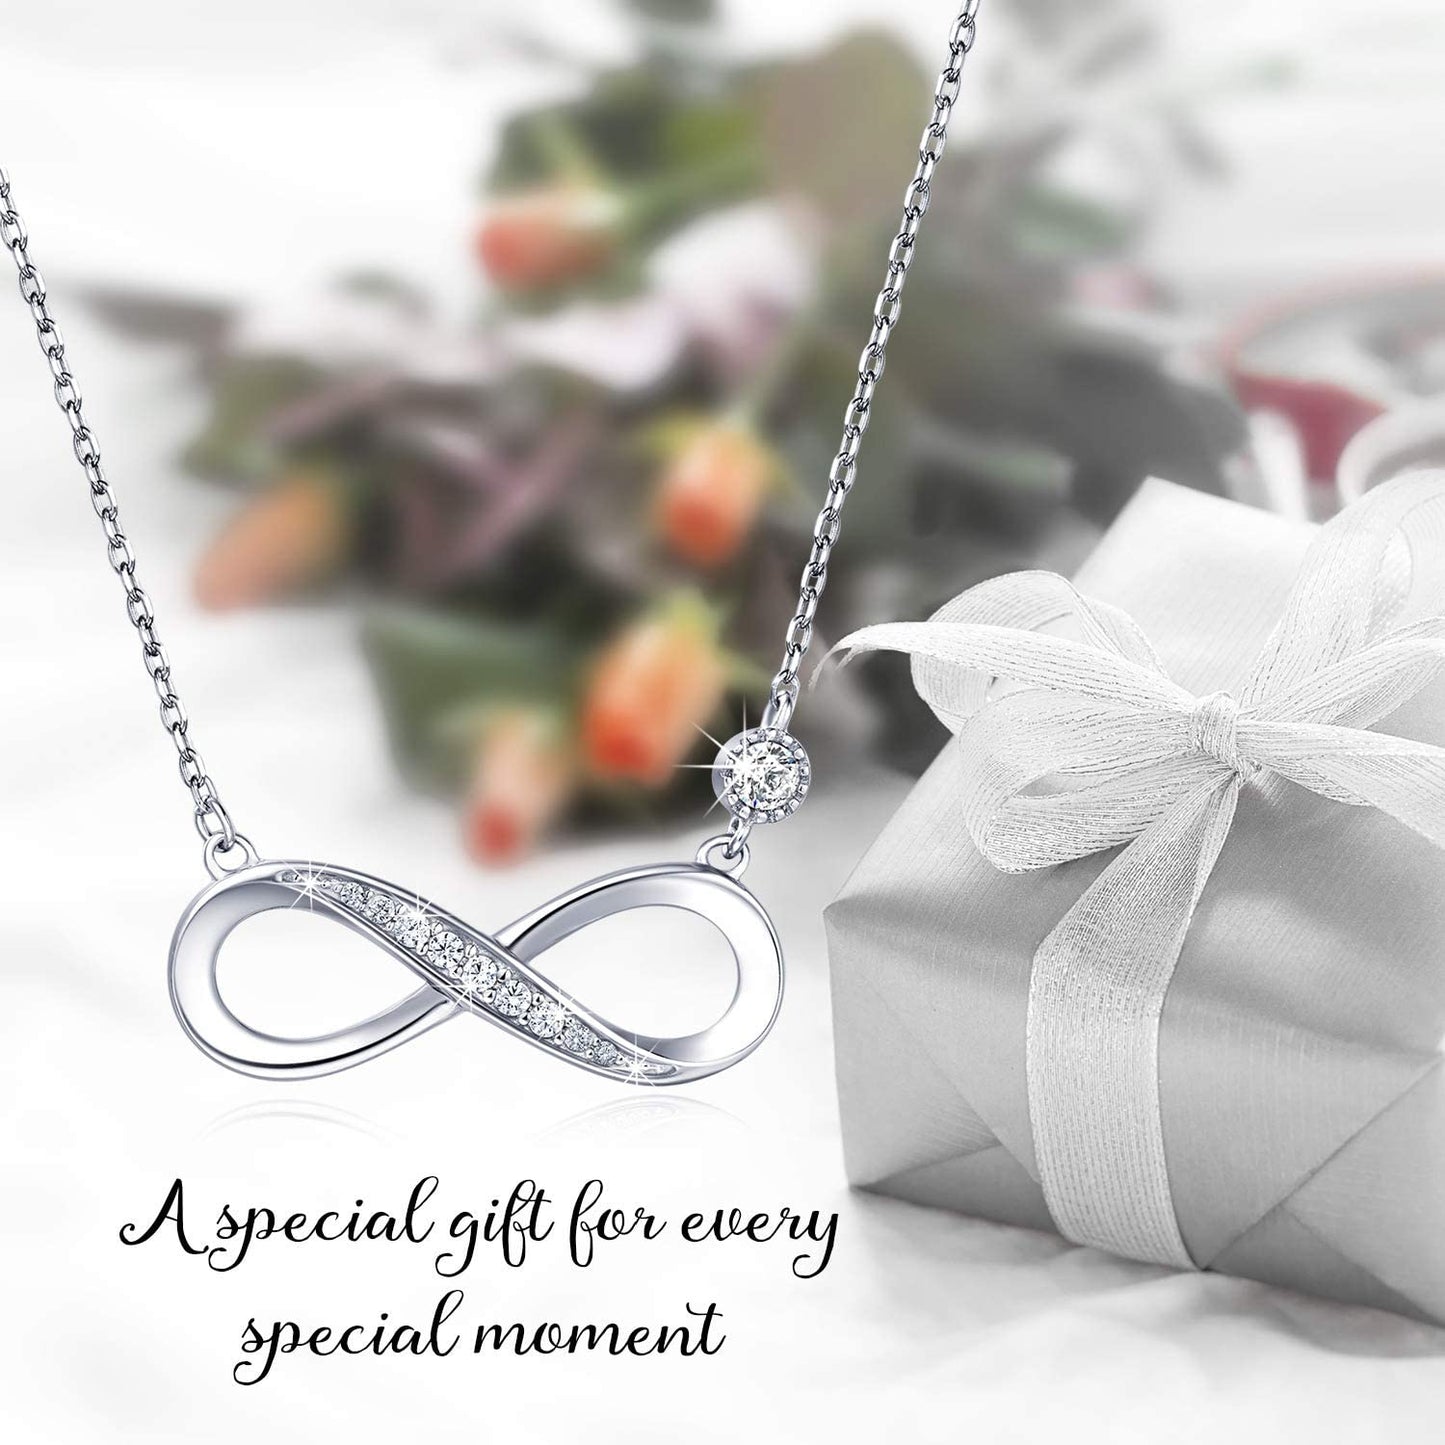 Billie Bijoux Infinity Necklaces 925 Sterling Silver Necklace Love Pendant White Gold Plated Diamond Women Necklace Mother's Day Gift for for Women Girls